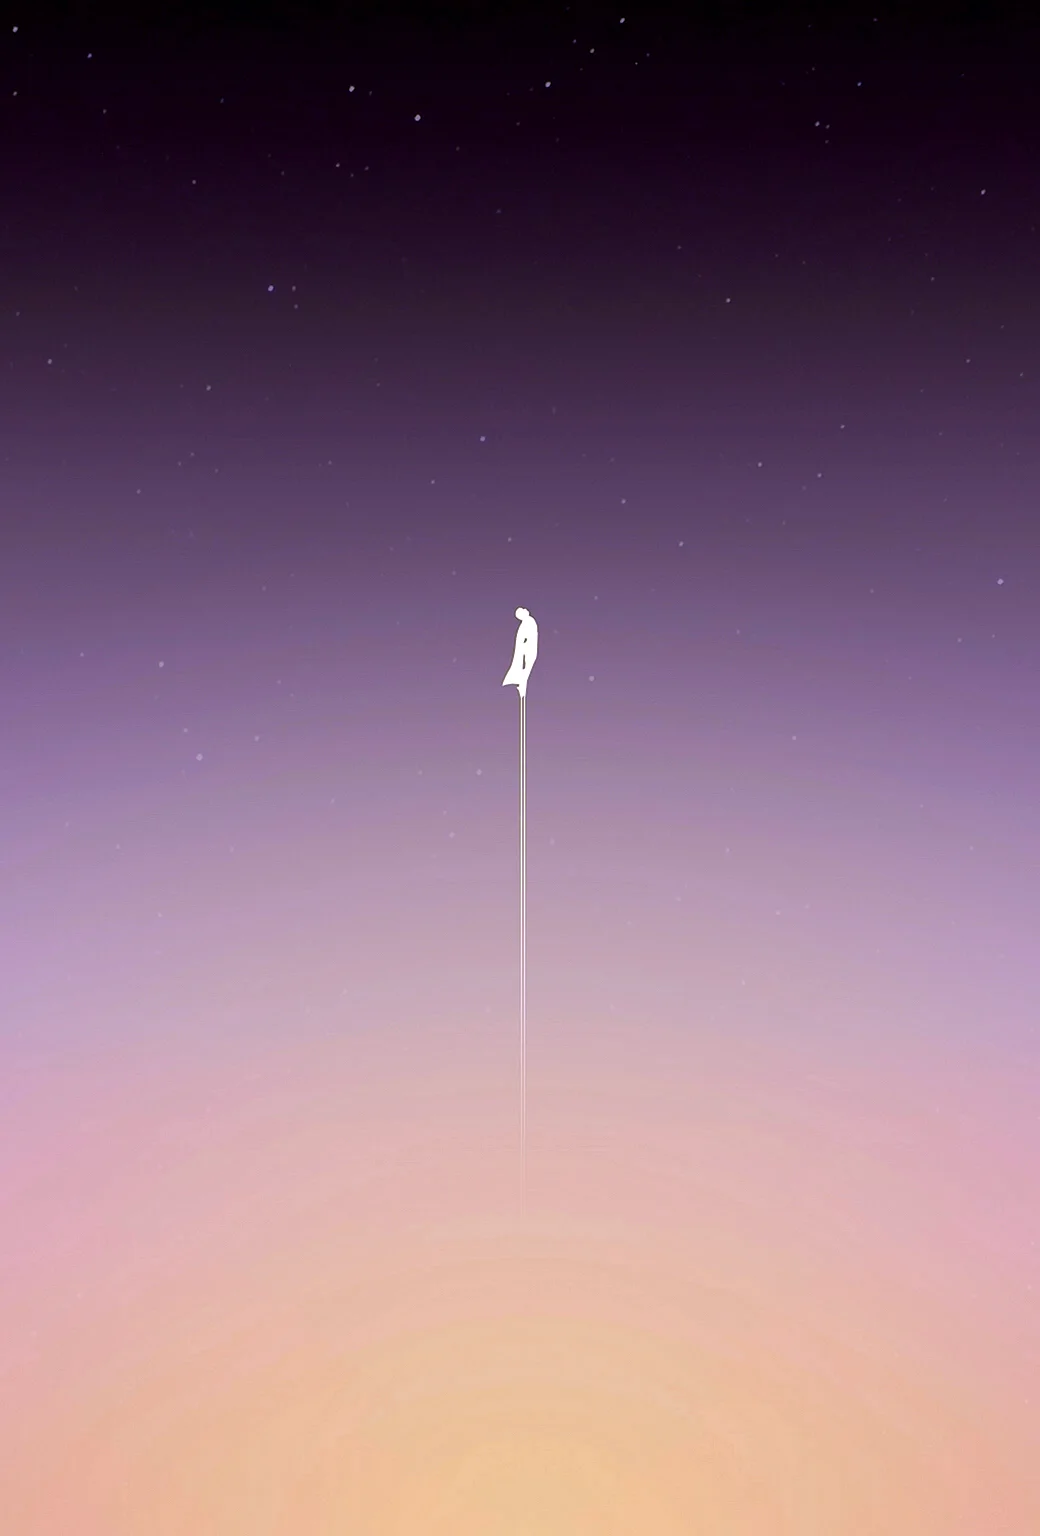 IOS Minimalism Wallpaper For iPhone